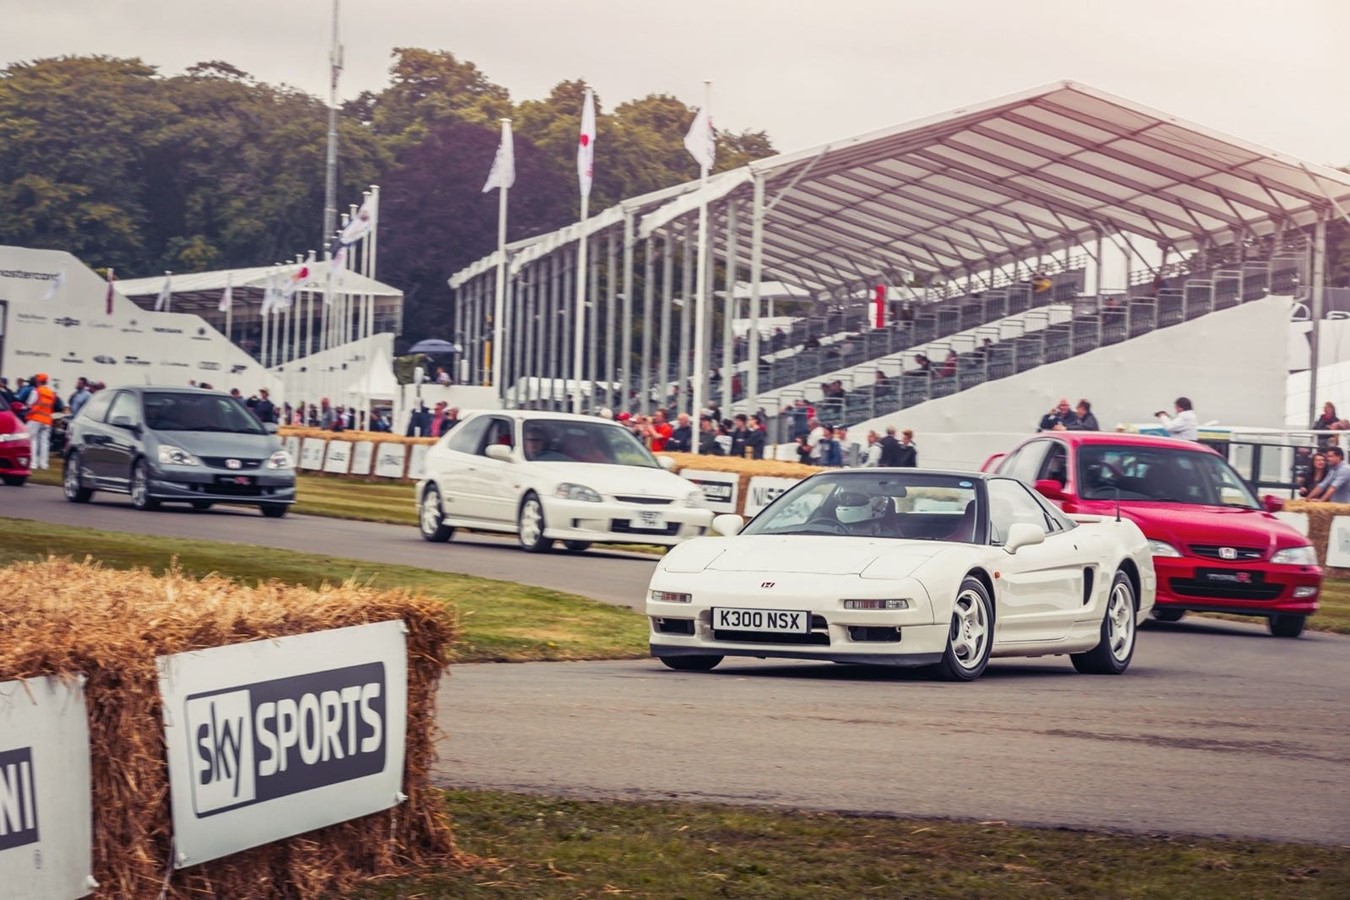 HONDA CELEBRATES 25 YEARS OF TYPE R AND FIREBLADE AT GOODWOOD FESTIVAL OF SPEED